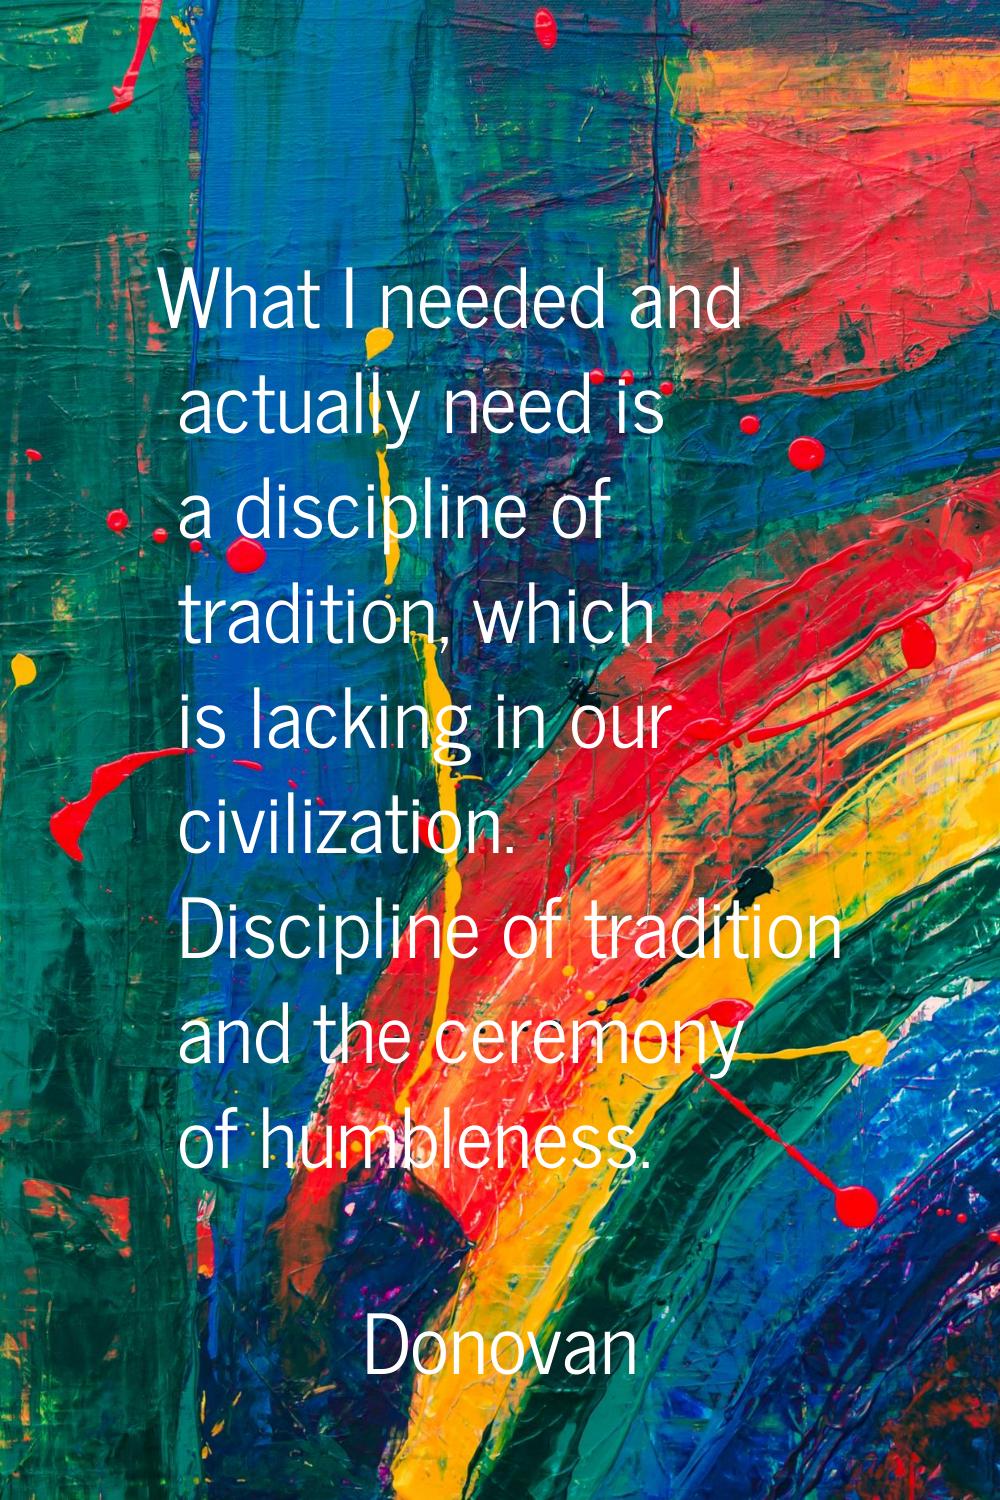 What I needed and actually need is a discipline of tradition, which is lacking in our civilization.